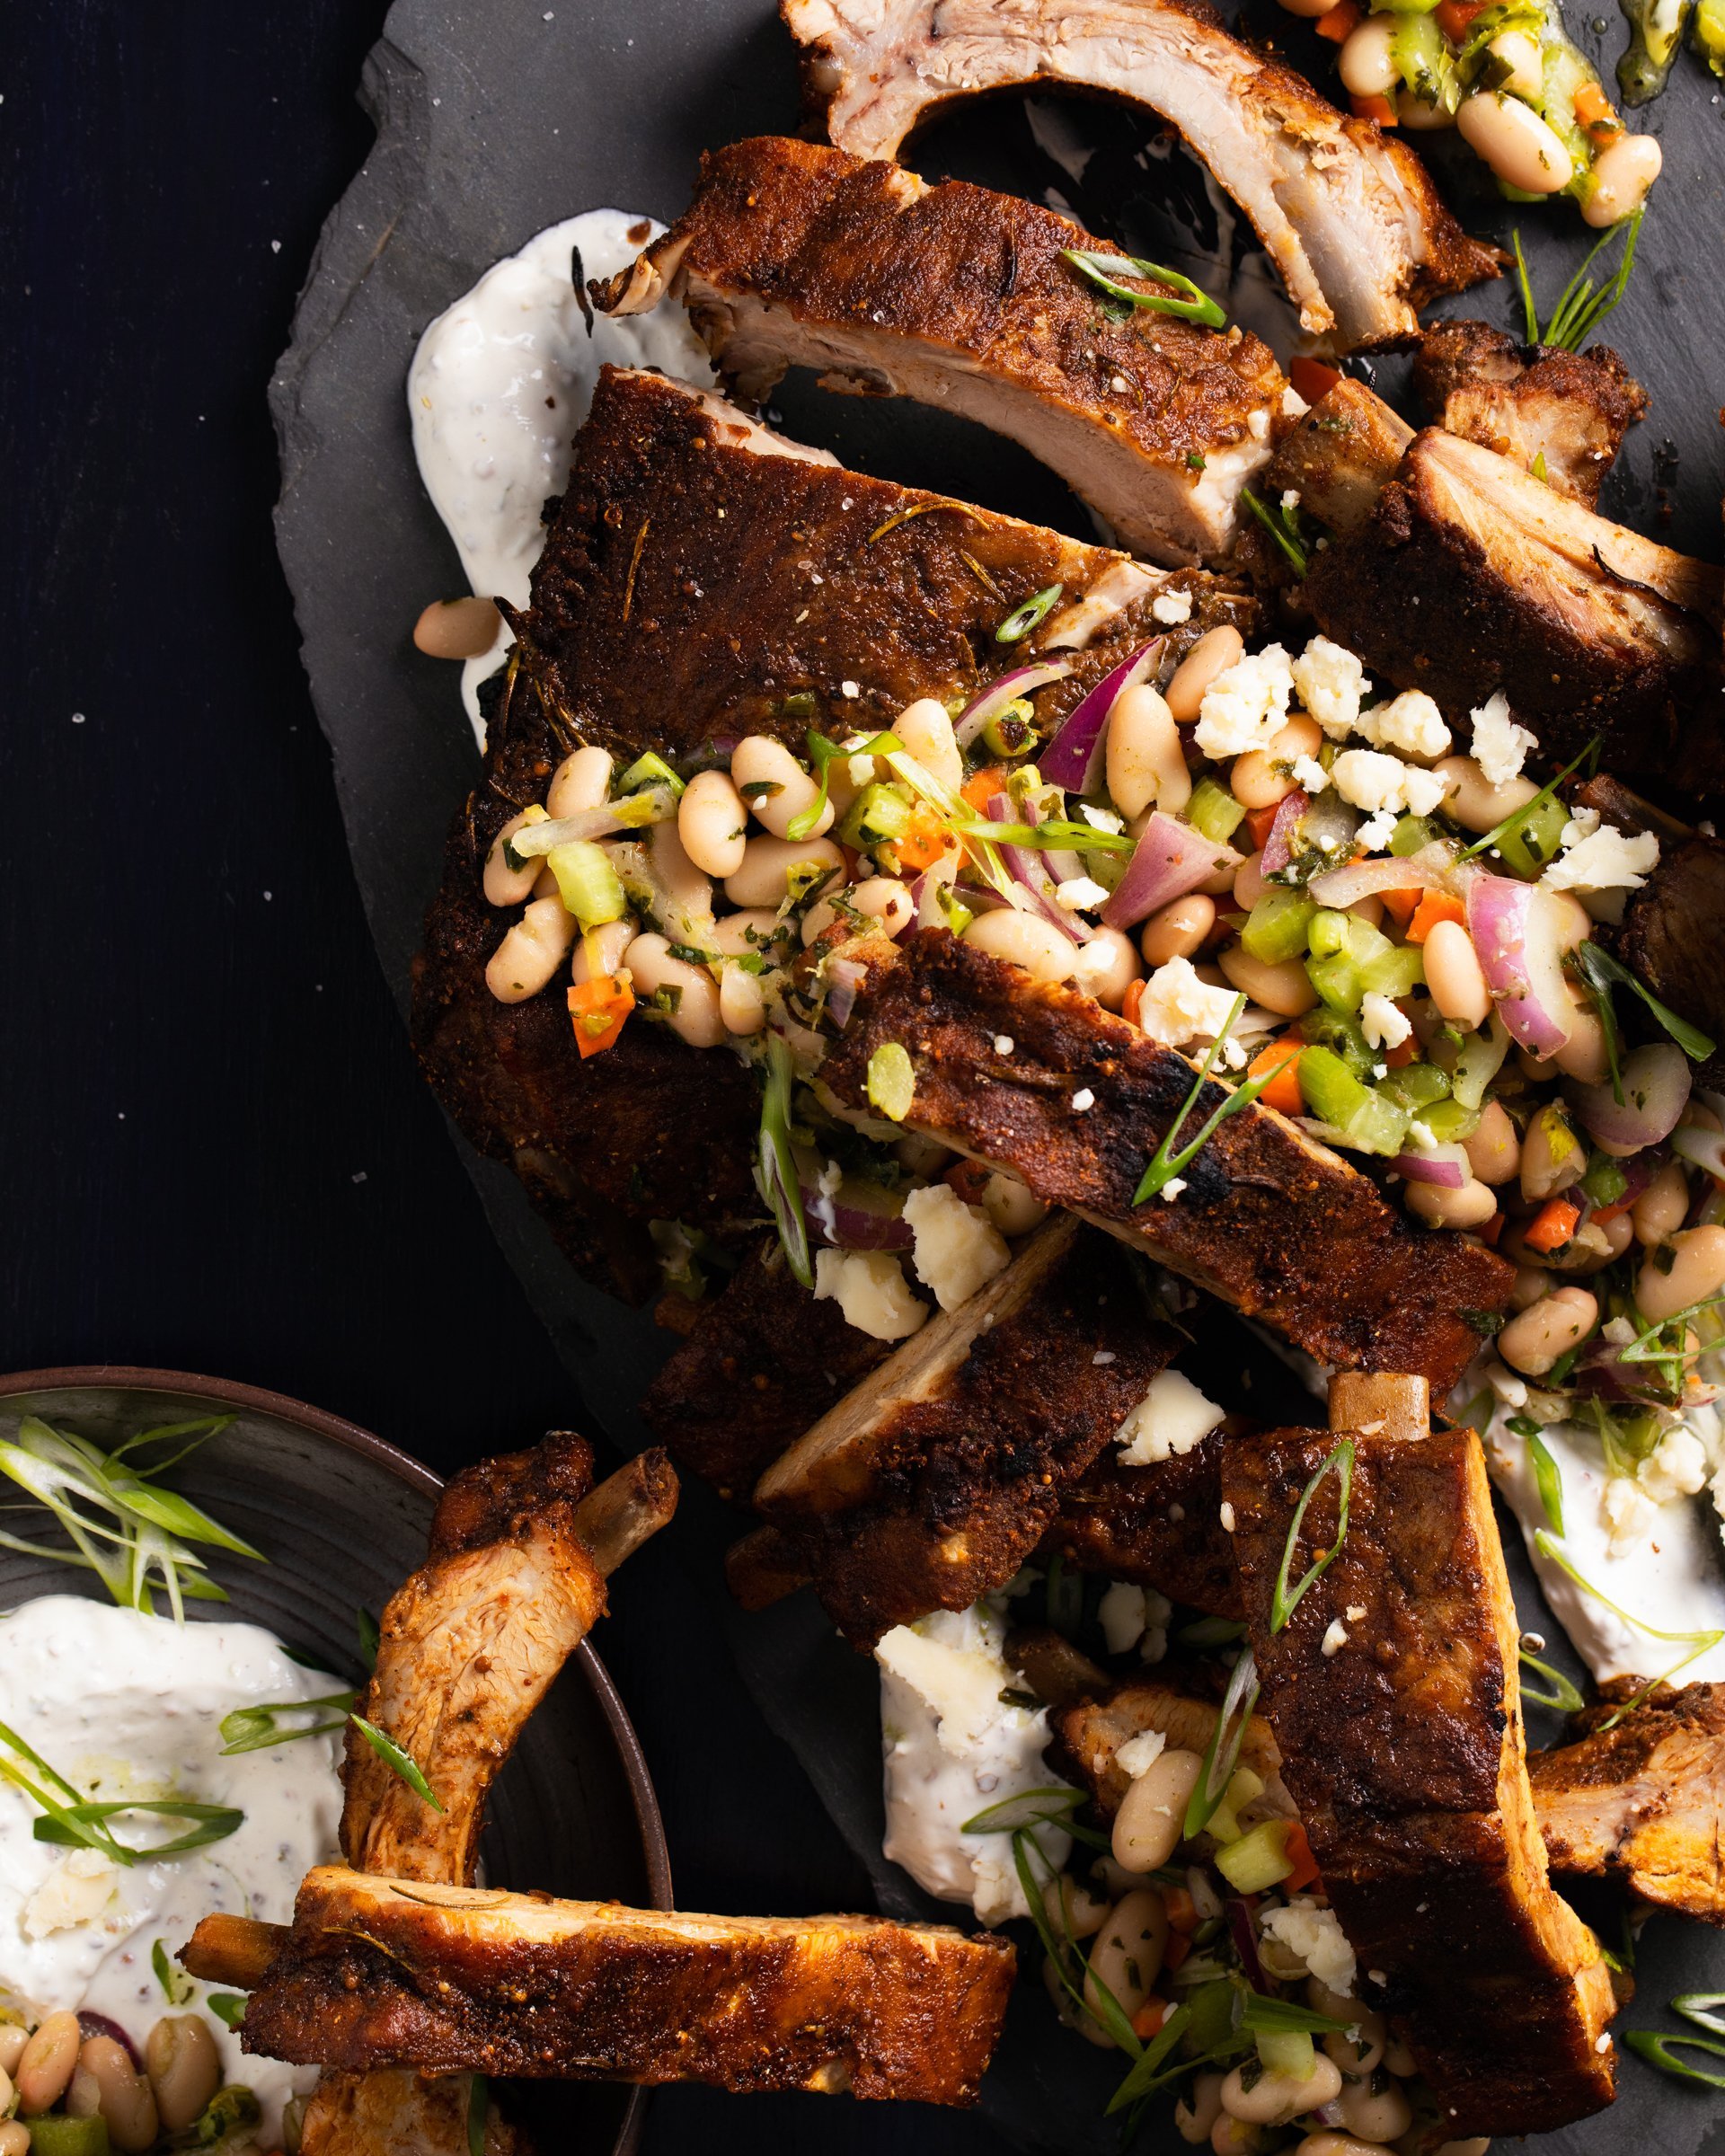 A rack of ribs sits covered in beans and other herbs as a part of the super bowl spread.